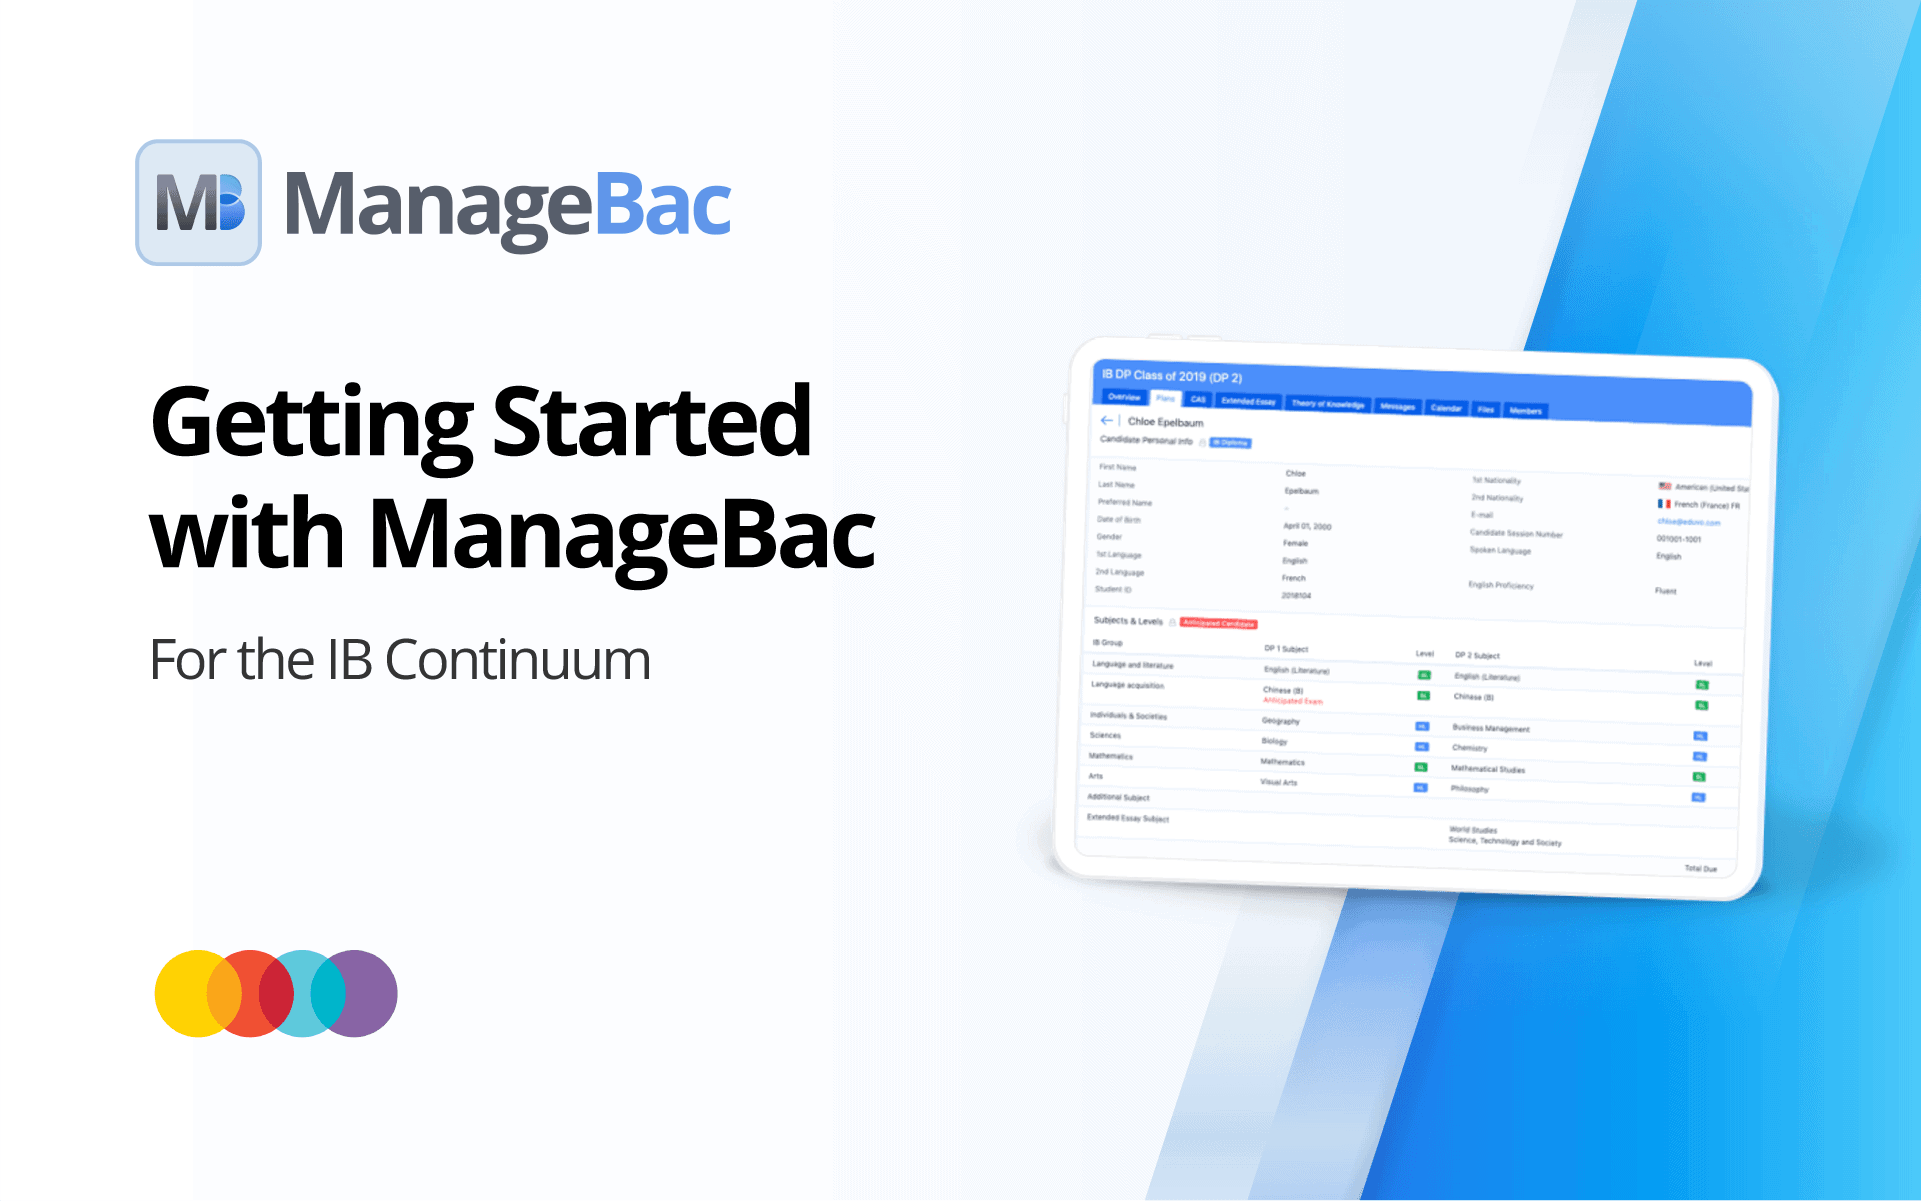 Getting Started with ManageBac for the IB Continuum